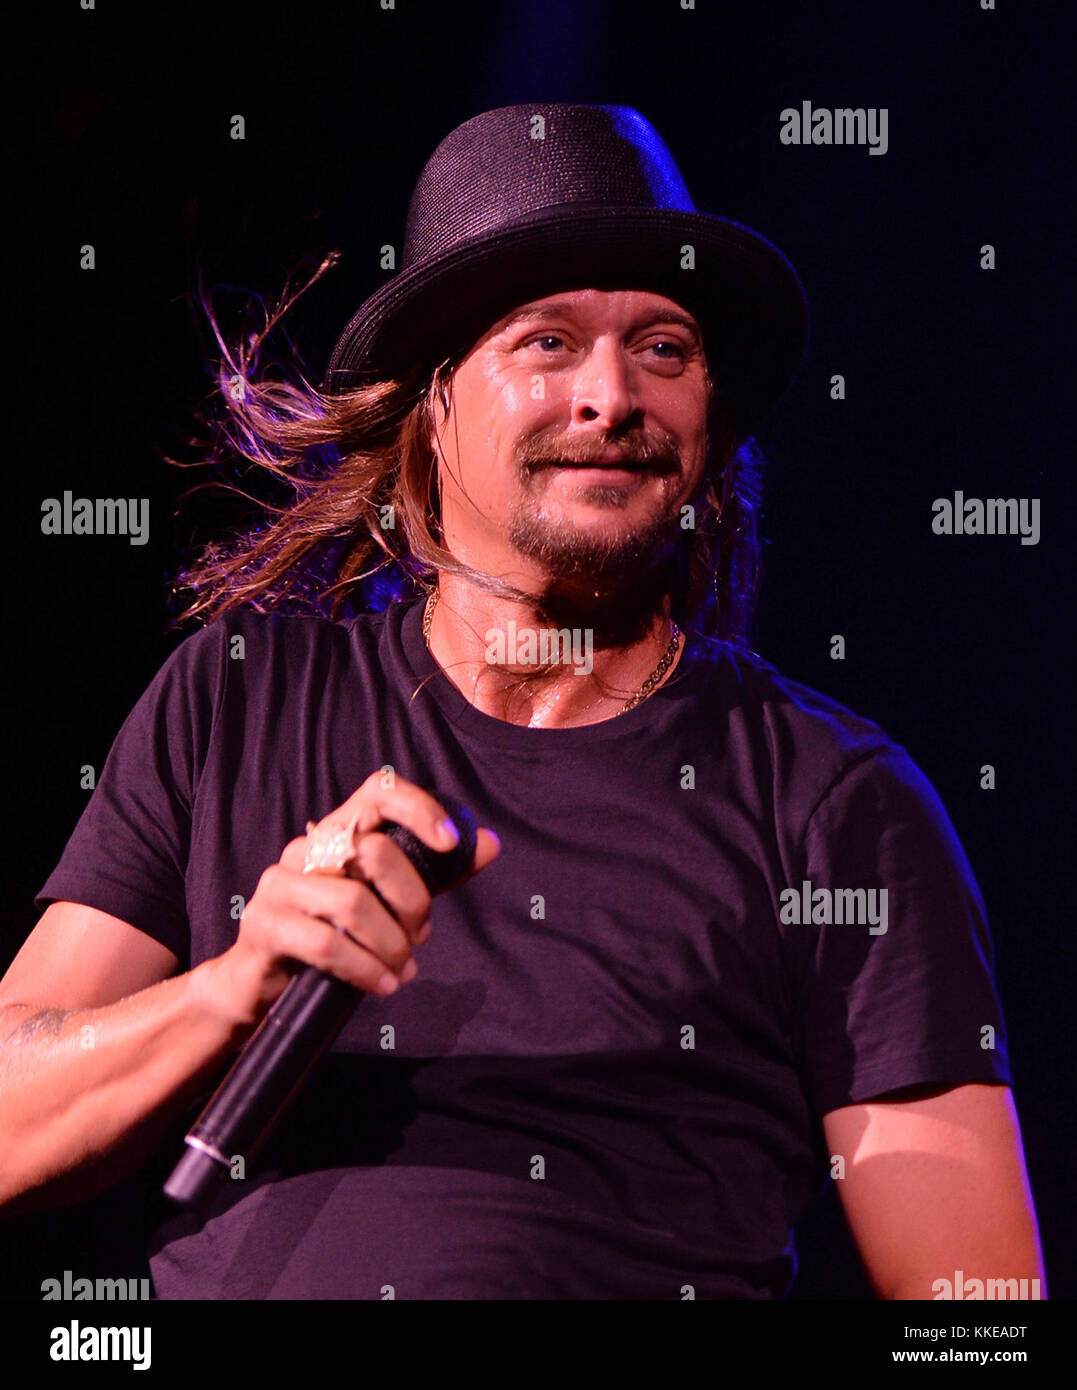 WEST PALM BEACH, FL - JULY 16: Robert James Ritchie AKA Kid Rock performs at The Coral Sky Amphitheater on July 16, 2015 in West Palm Beach Florida.  People:  Kid Rock Stock Photo